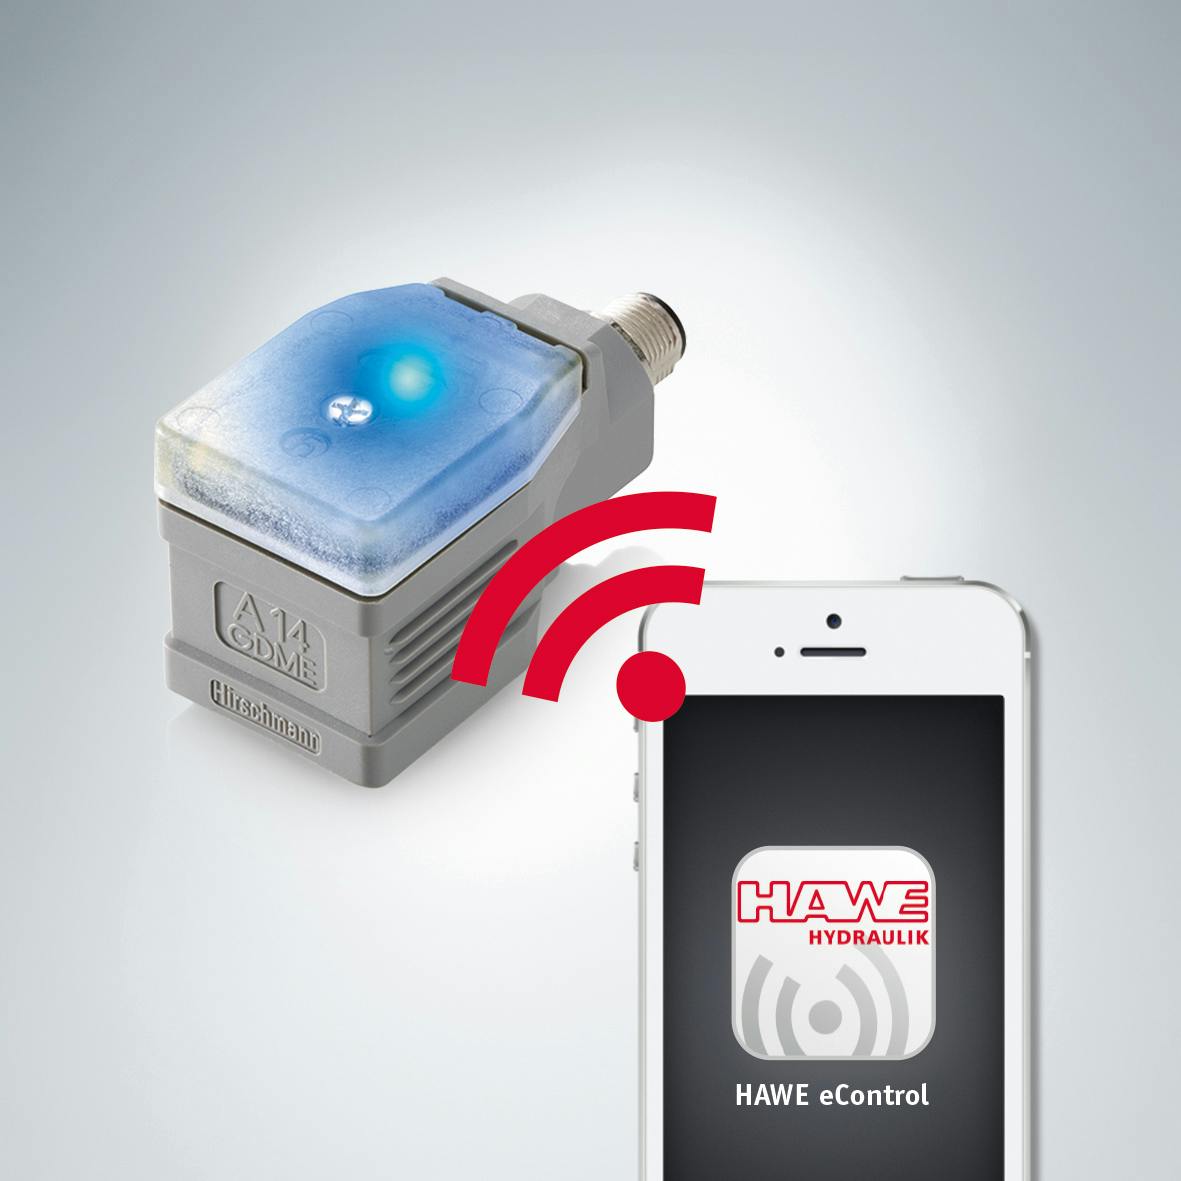 Hawe App and Amplifier Let Smart Phone Control Hydraulic Valves | Construction News